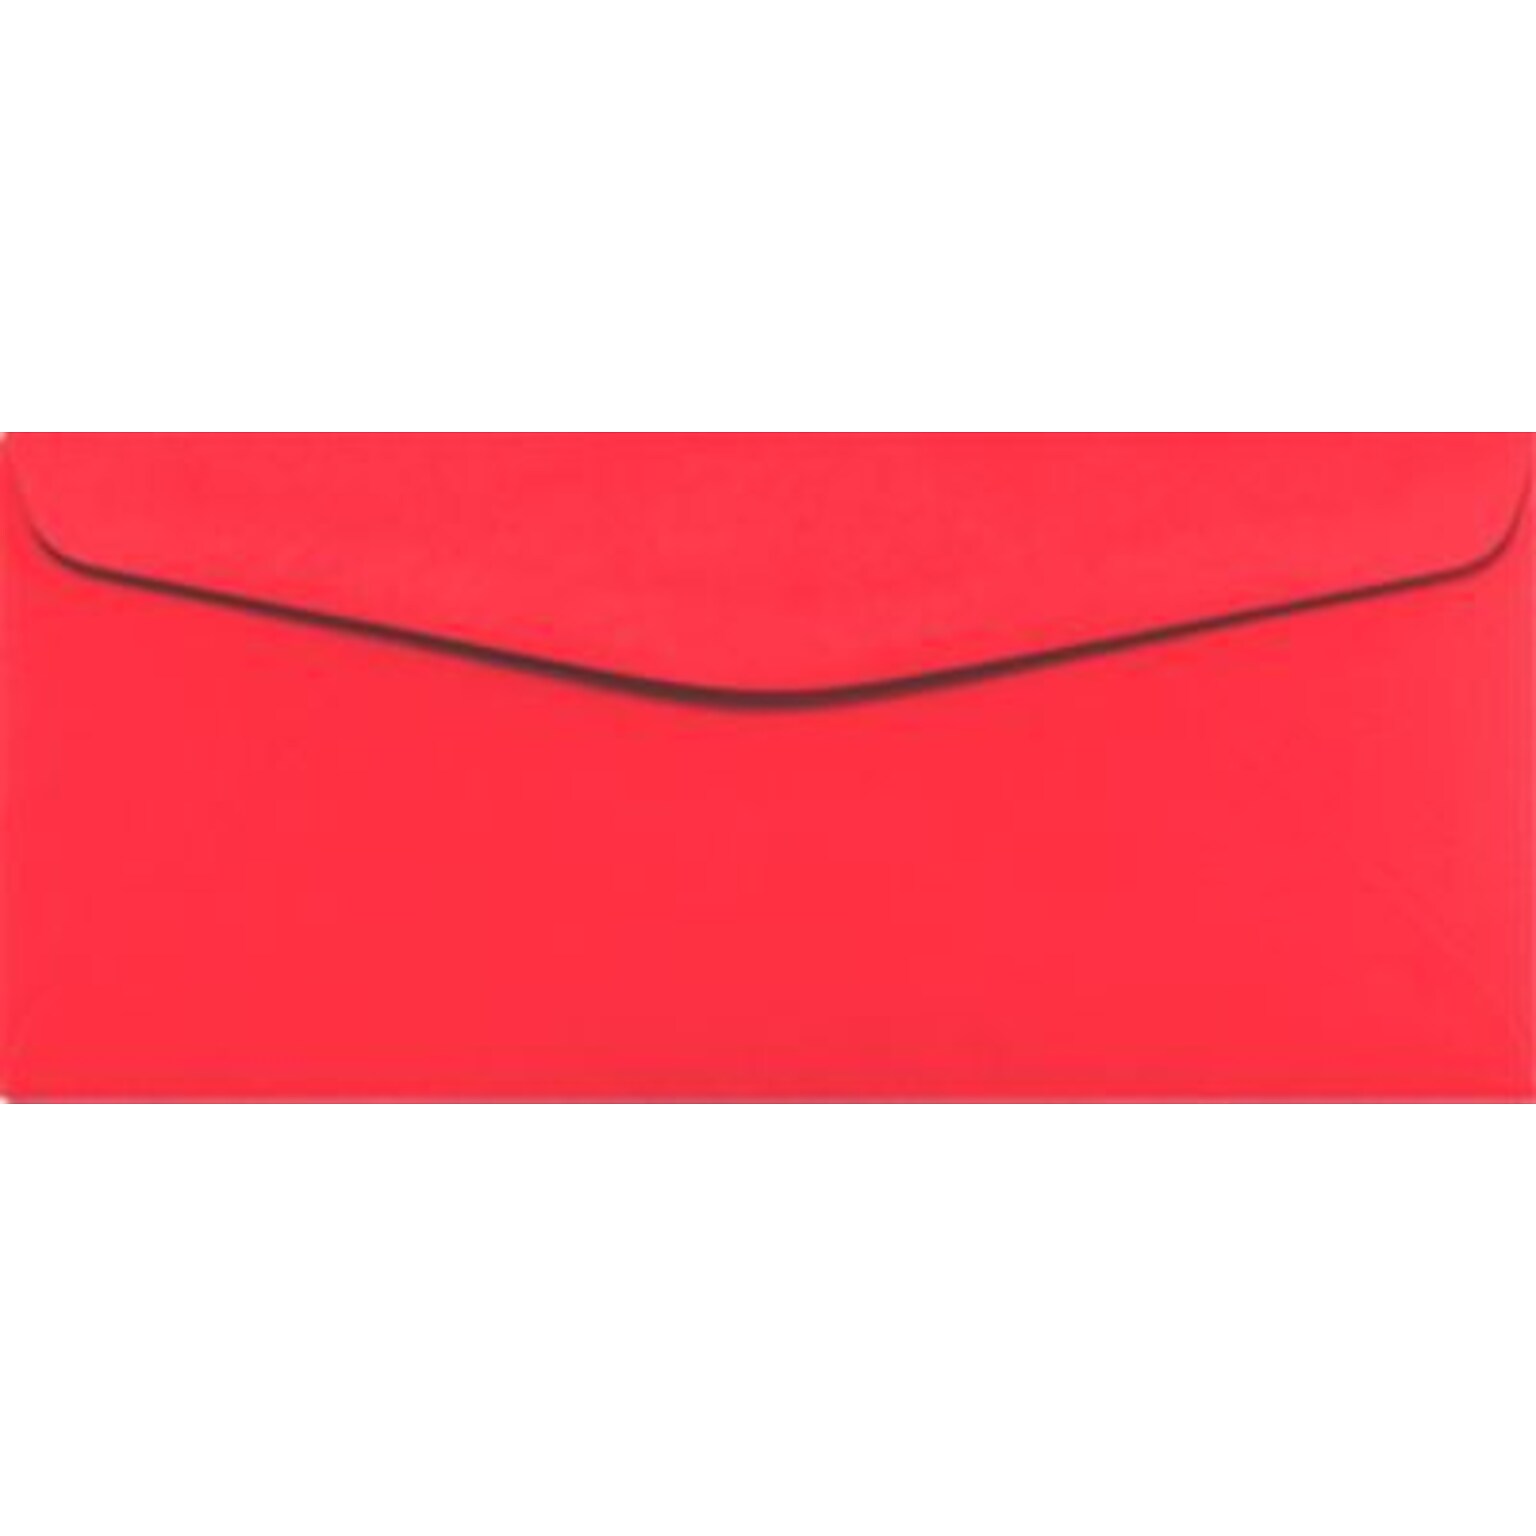 LUX #9 Booklet Envelope, 3 7/8 x 8 7/8, Electric Cherry, 500/Pack (WS-2041-500)